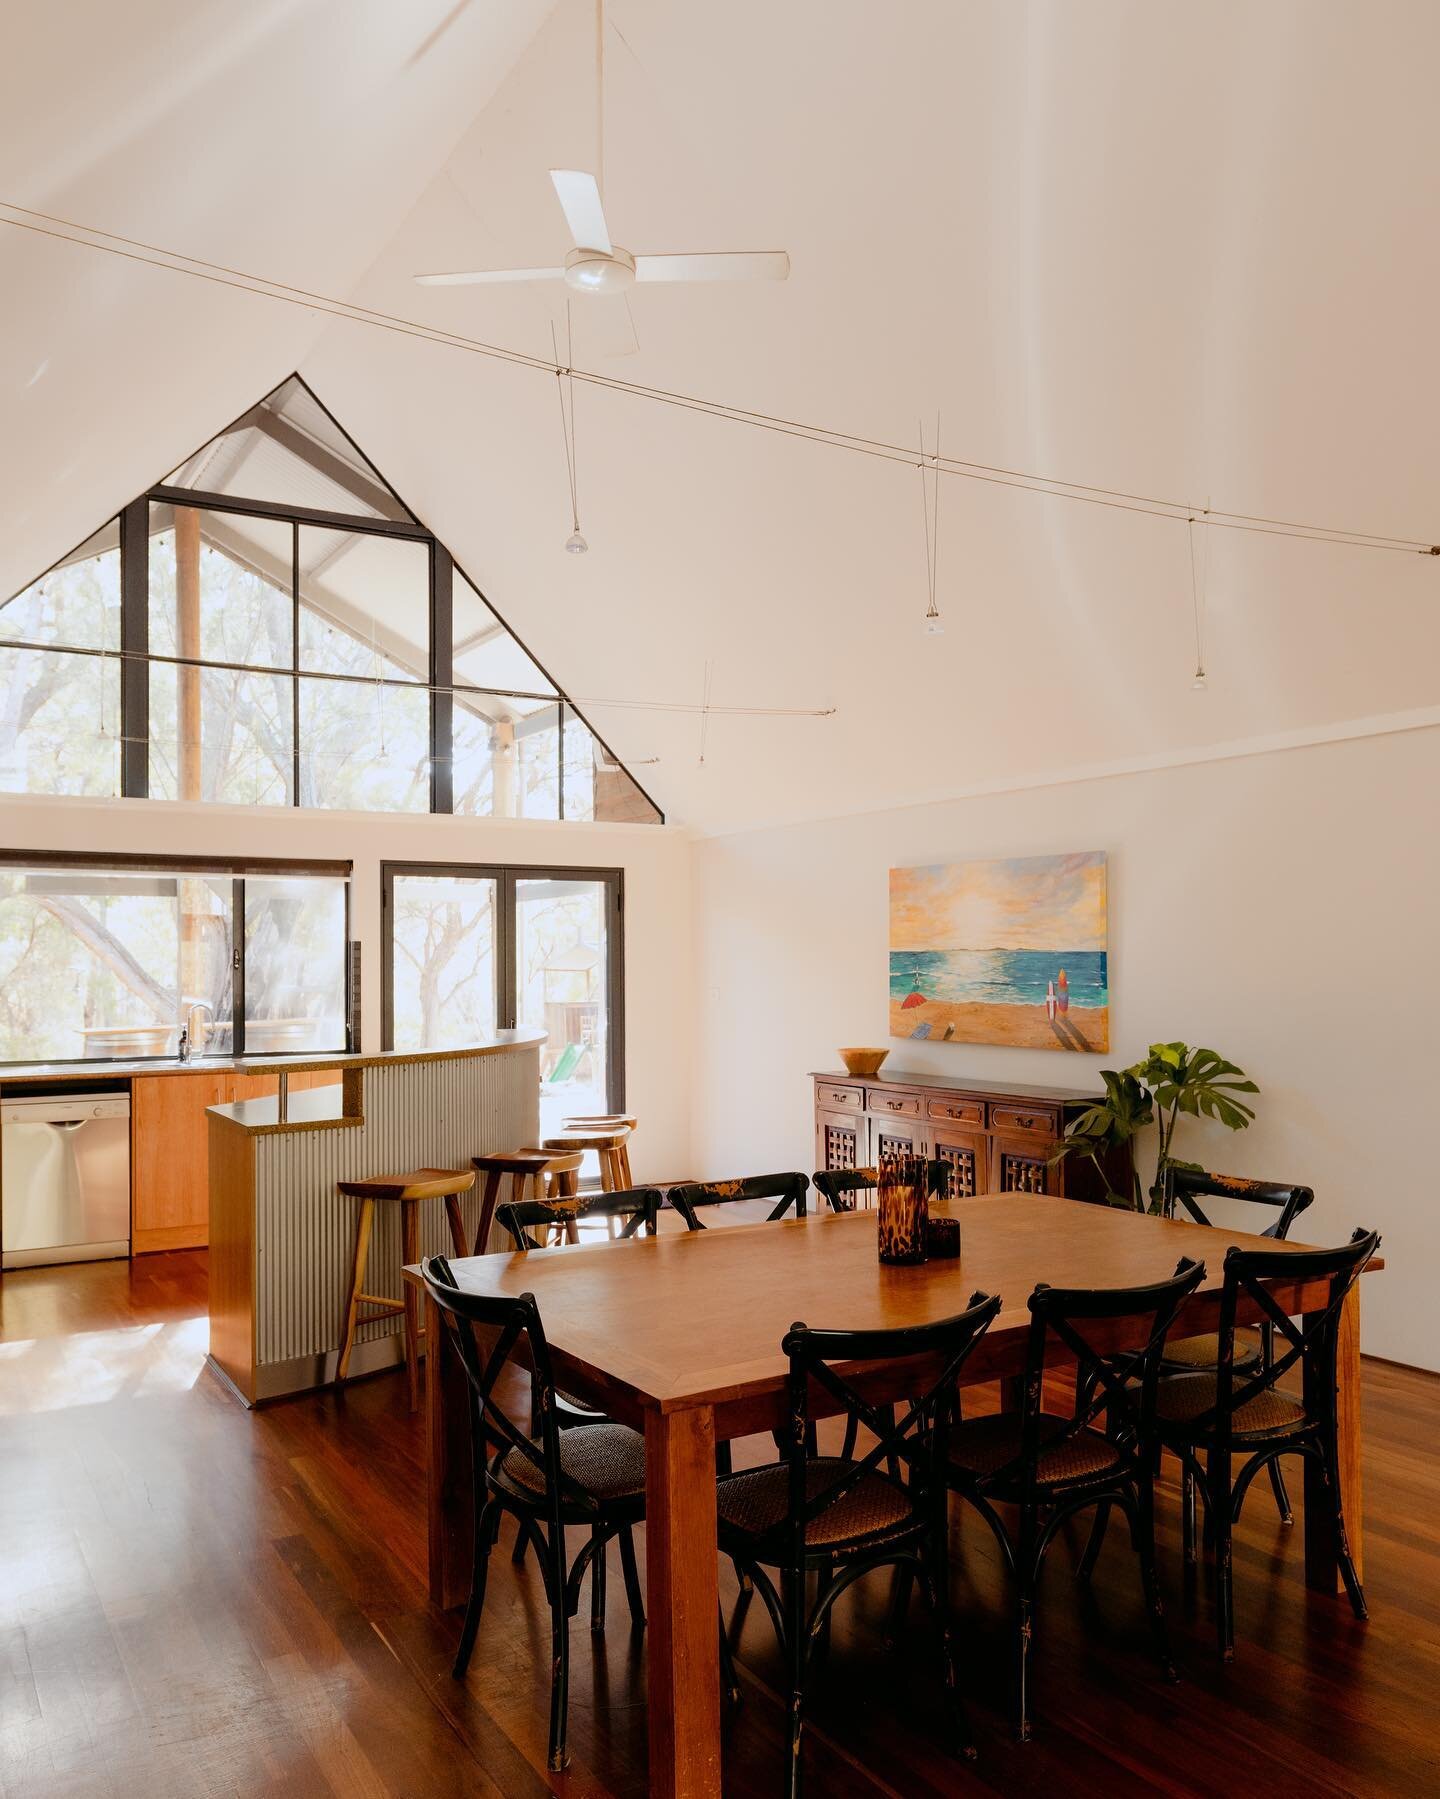 Dreaming of a getaway to a peaceful location? 

Meltdown, a rural retreat in Yallingup has had some availability become available next week and during school holidays!

Hit the link in our bio 👆 to book. 

#whatsonmargaretriver #yallingup #yallingup